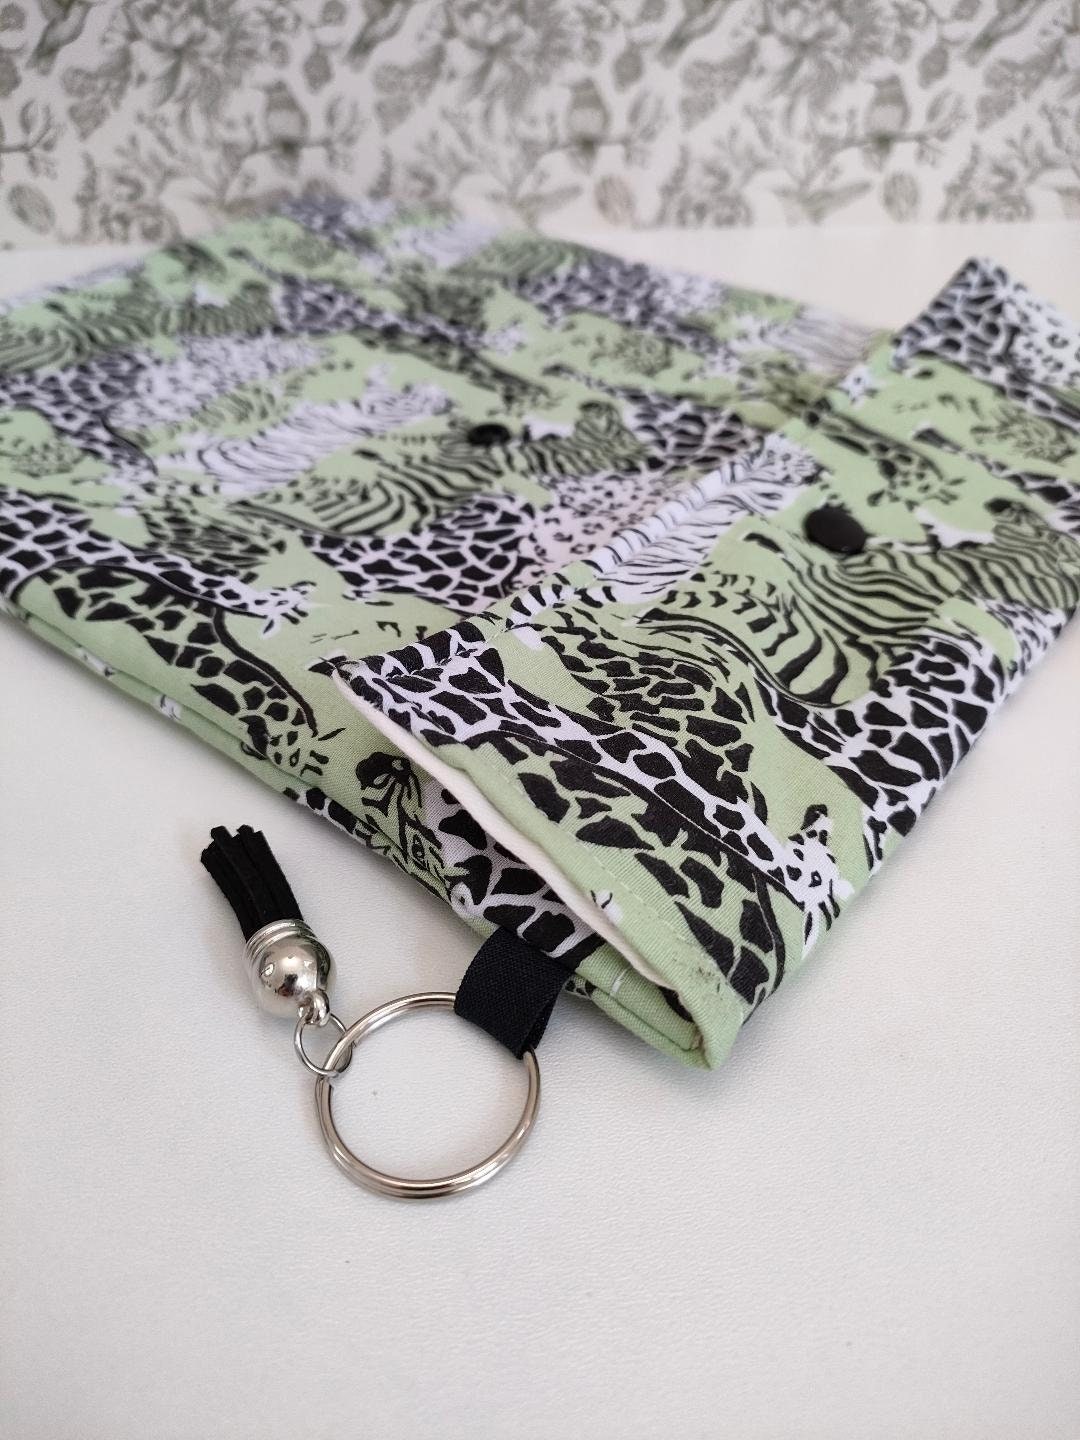 Adjustable Book Sleeve In Safari Print,Handmade Padded Protective Book Cosy, Safari Themed Animal Print Tablet Pouch, Holiday BookEssentials